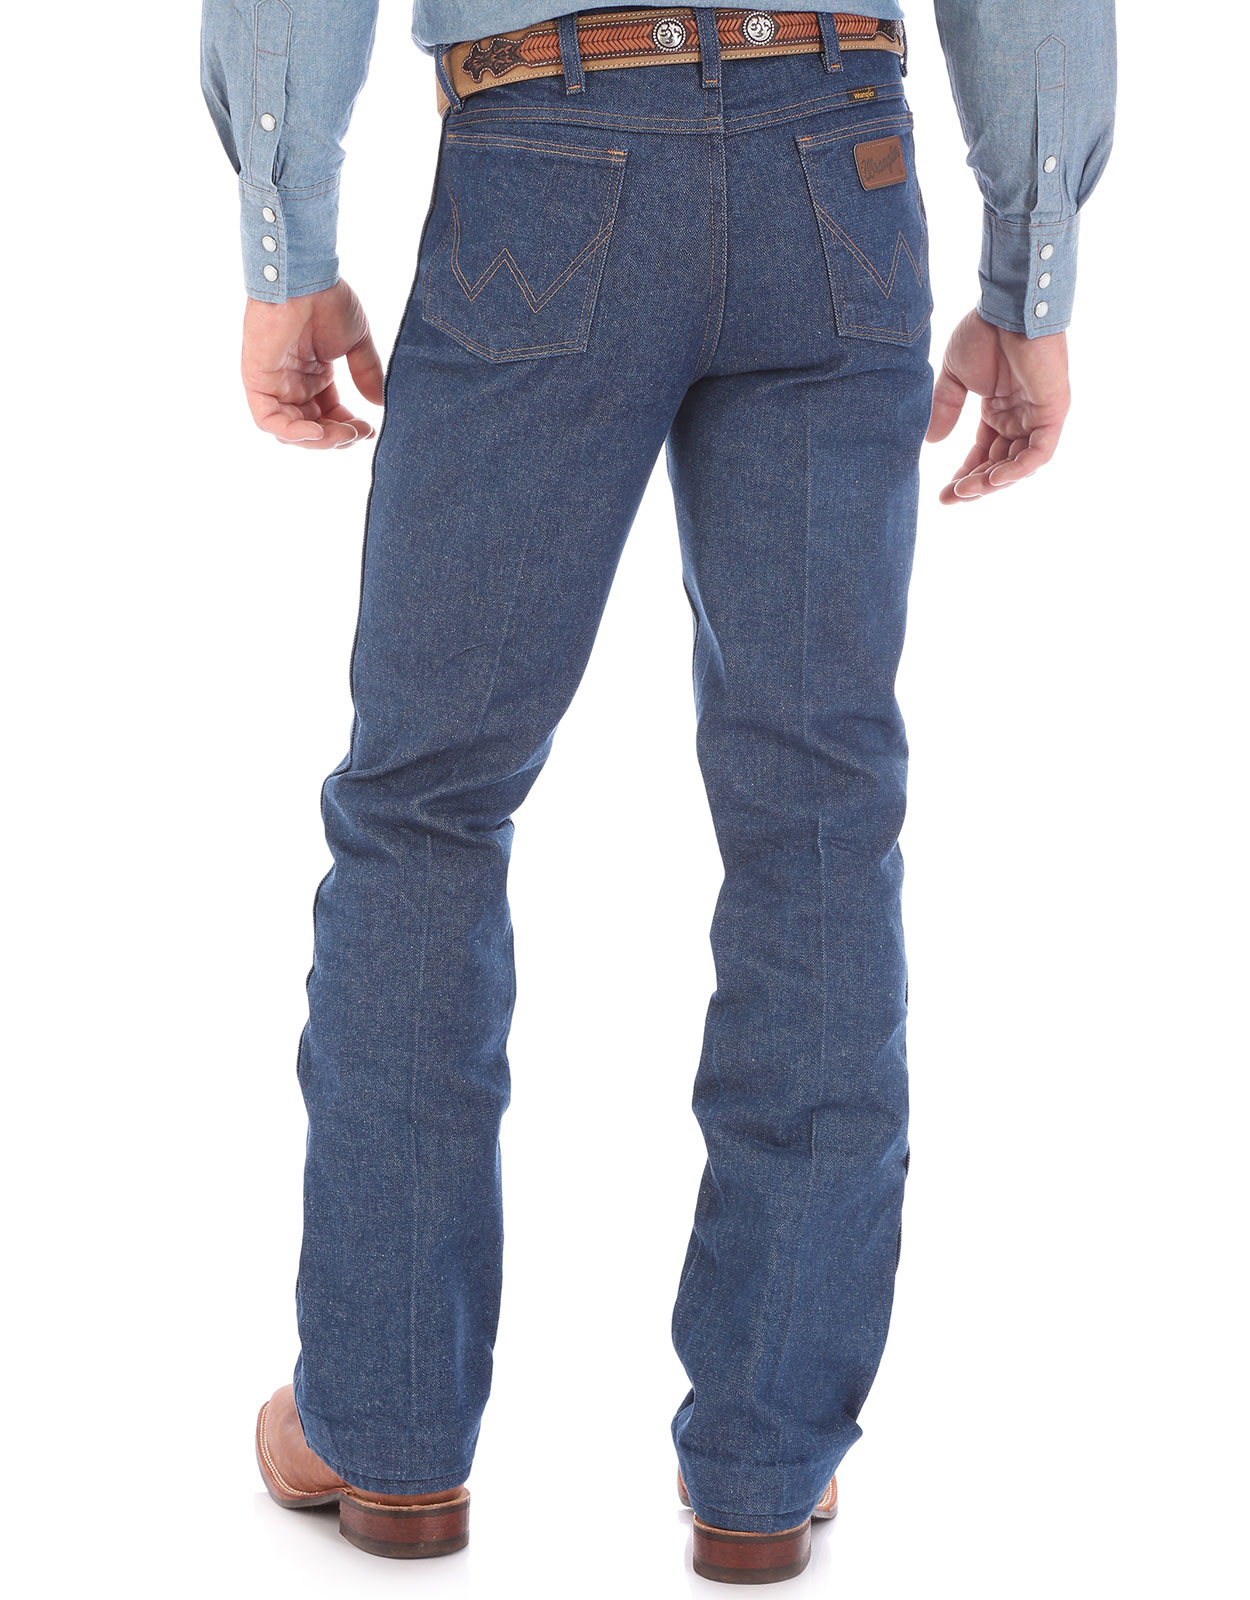 Wrangler 945 Boot Cut Cowboy Jeans for Men from